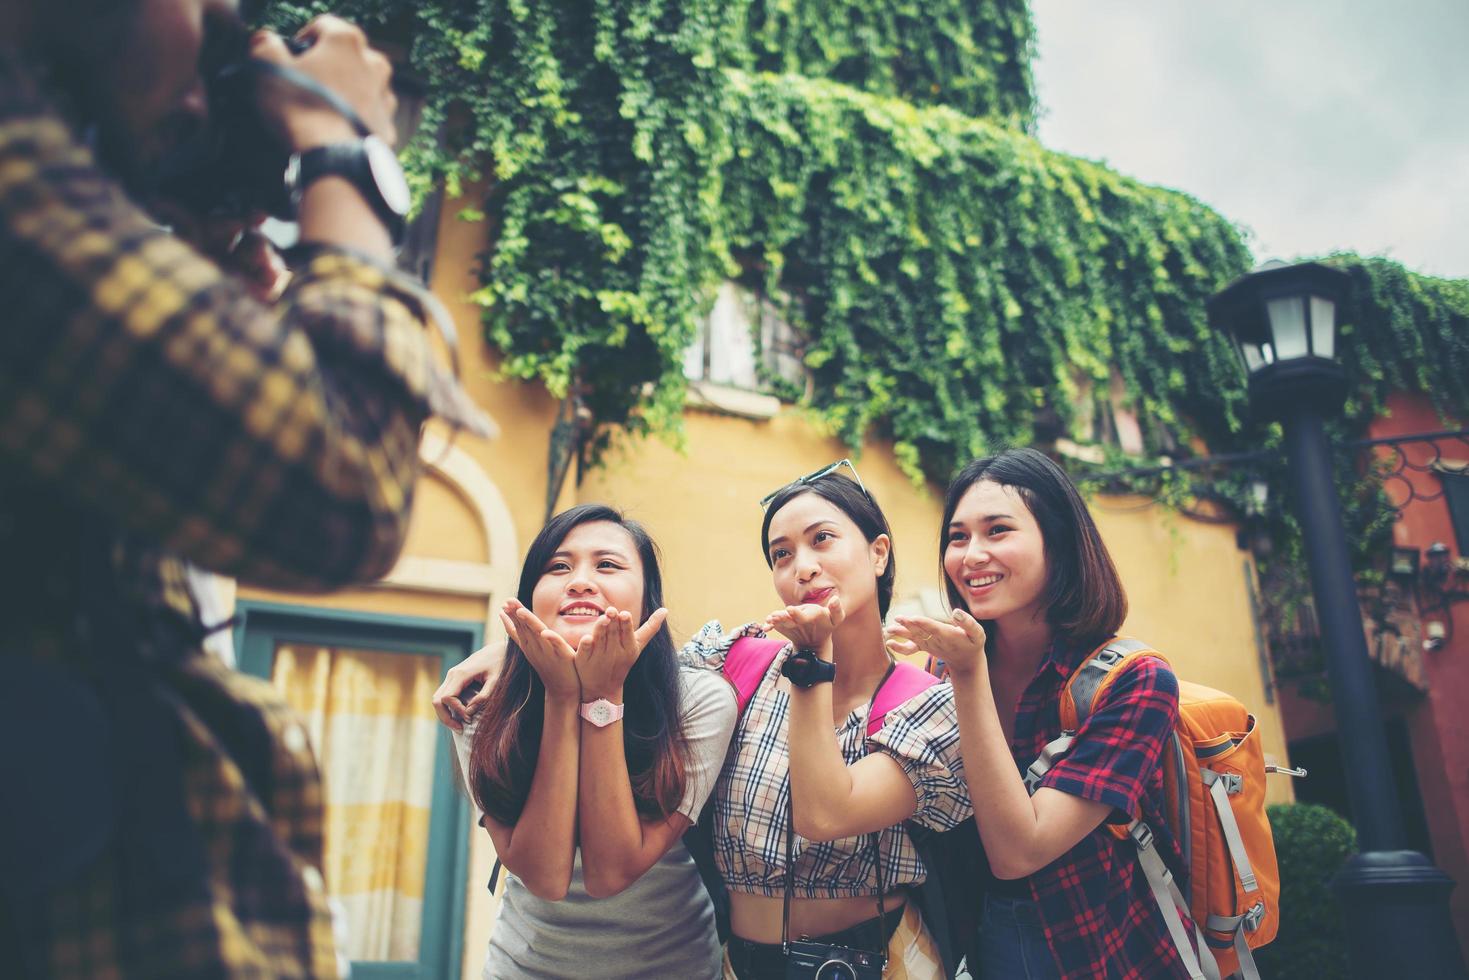 Group of happy friends taking selfies together in an urban area photo